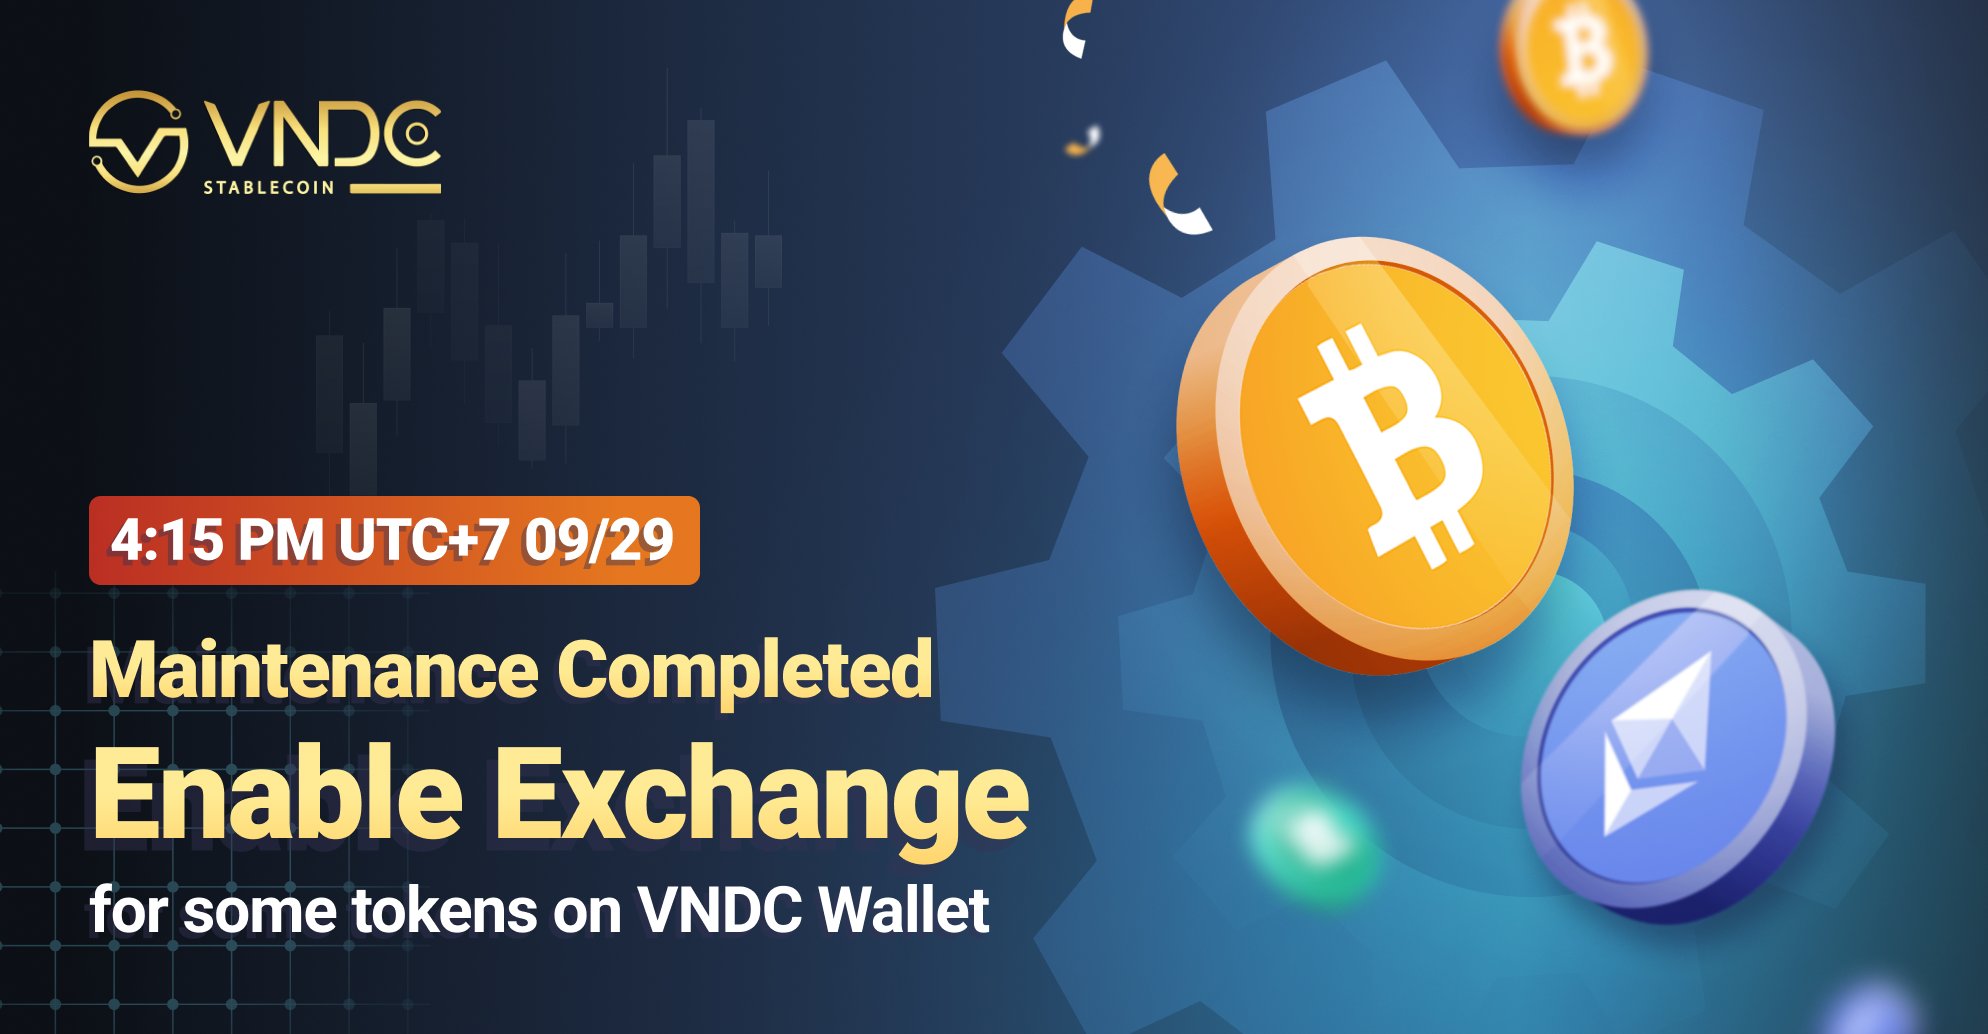 Maintenance Completed, Enable Exchange from 4:15 PM UTC+7 September 29